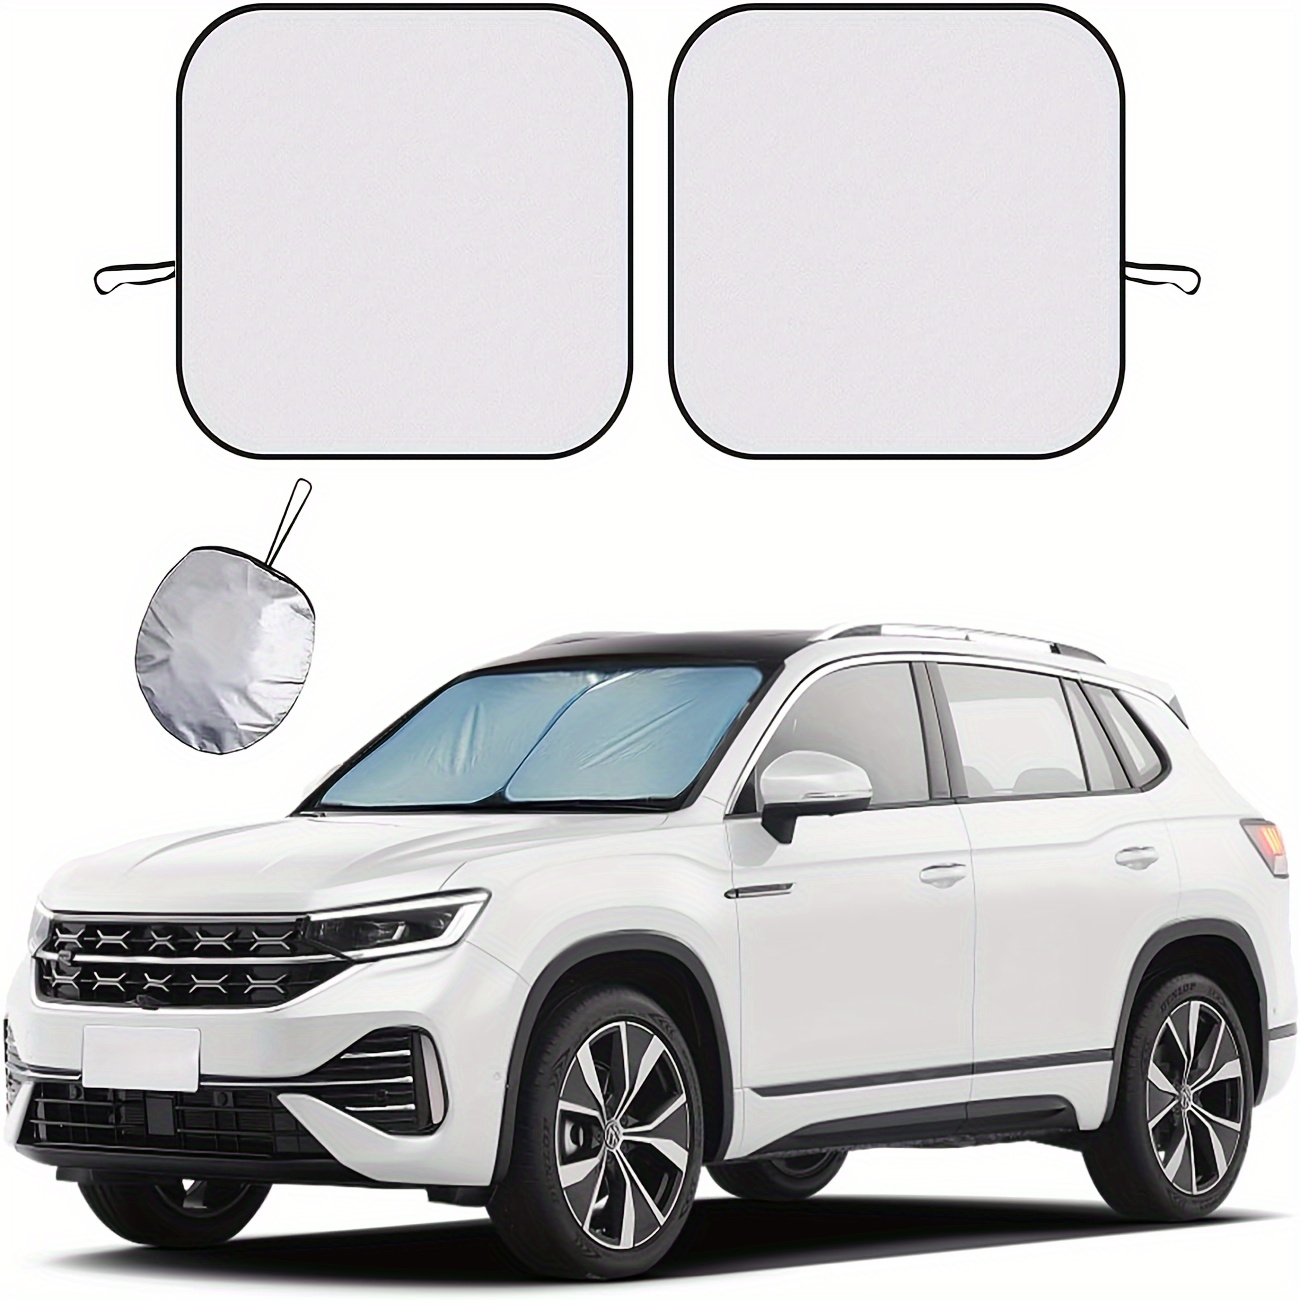 

2-piece Car Windshield Sunshades: Foldable Car Front Window Shades For Universal Vehicles - Silver